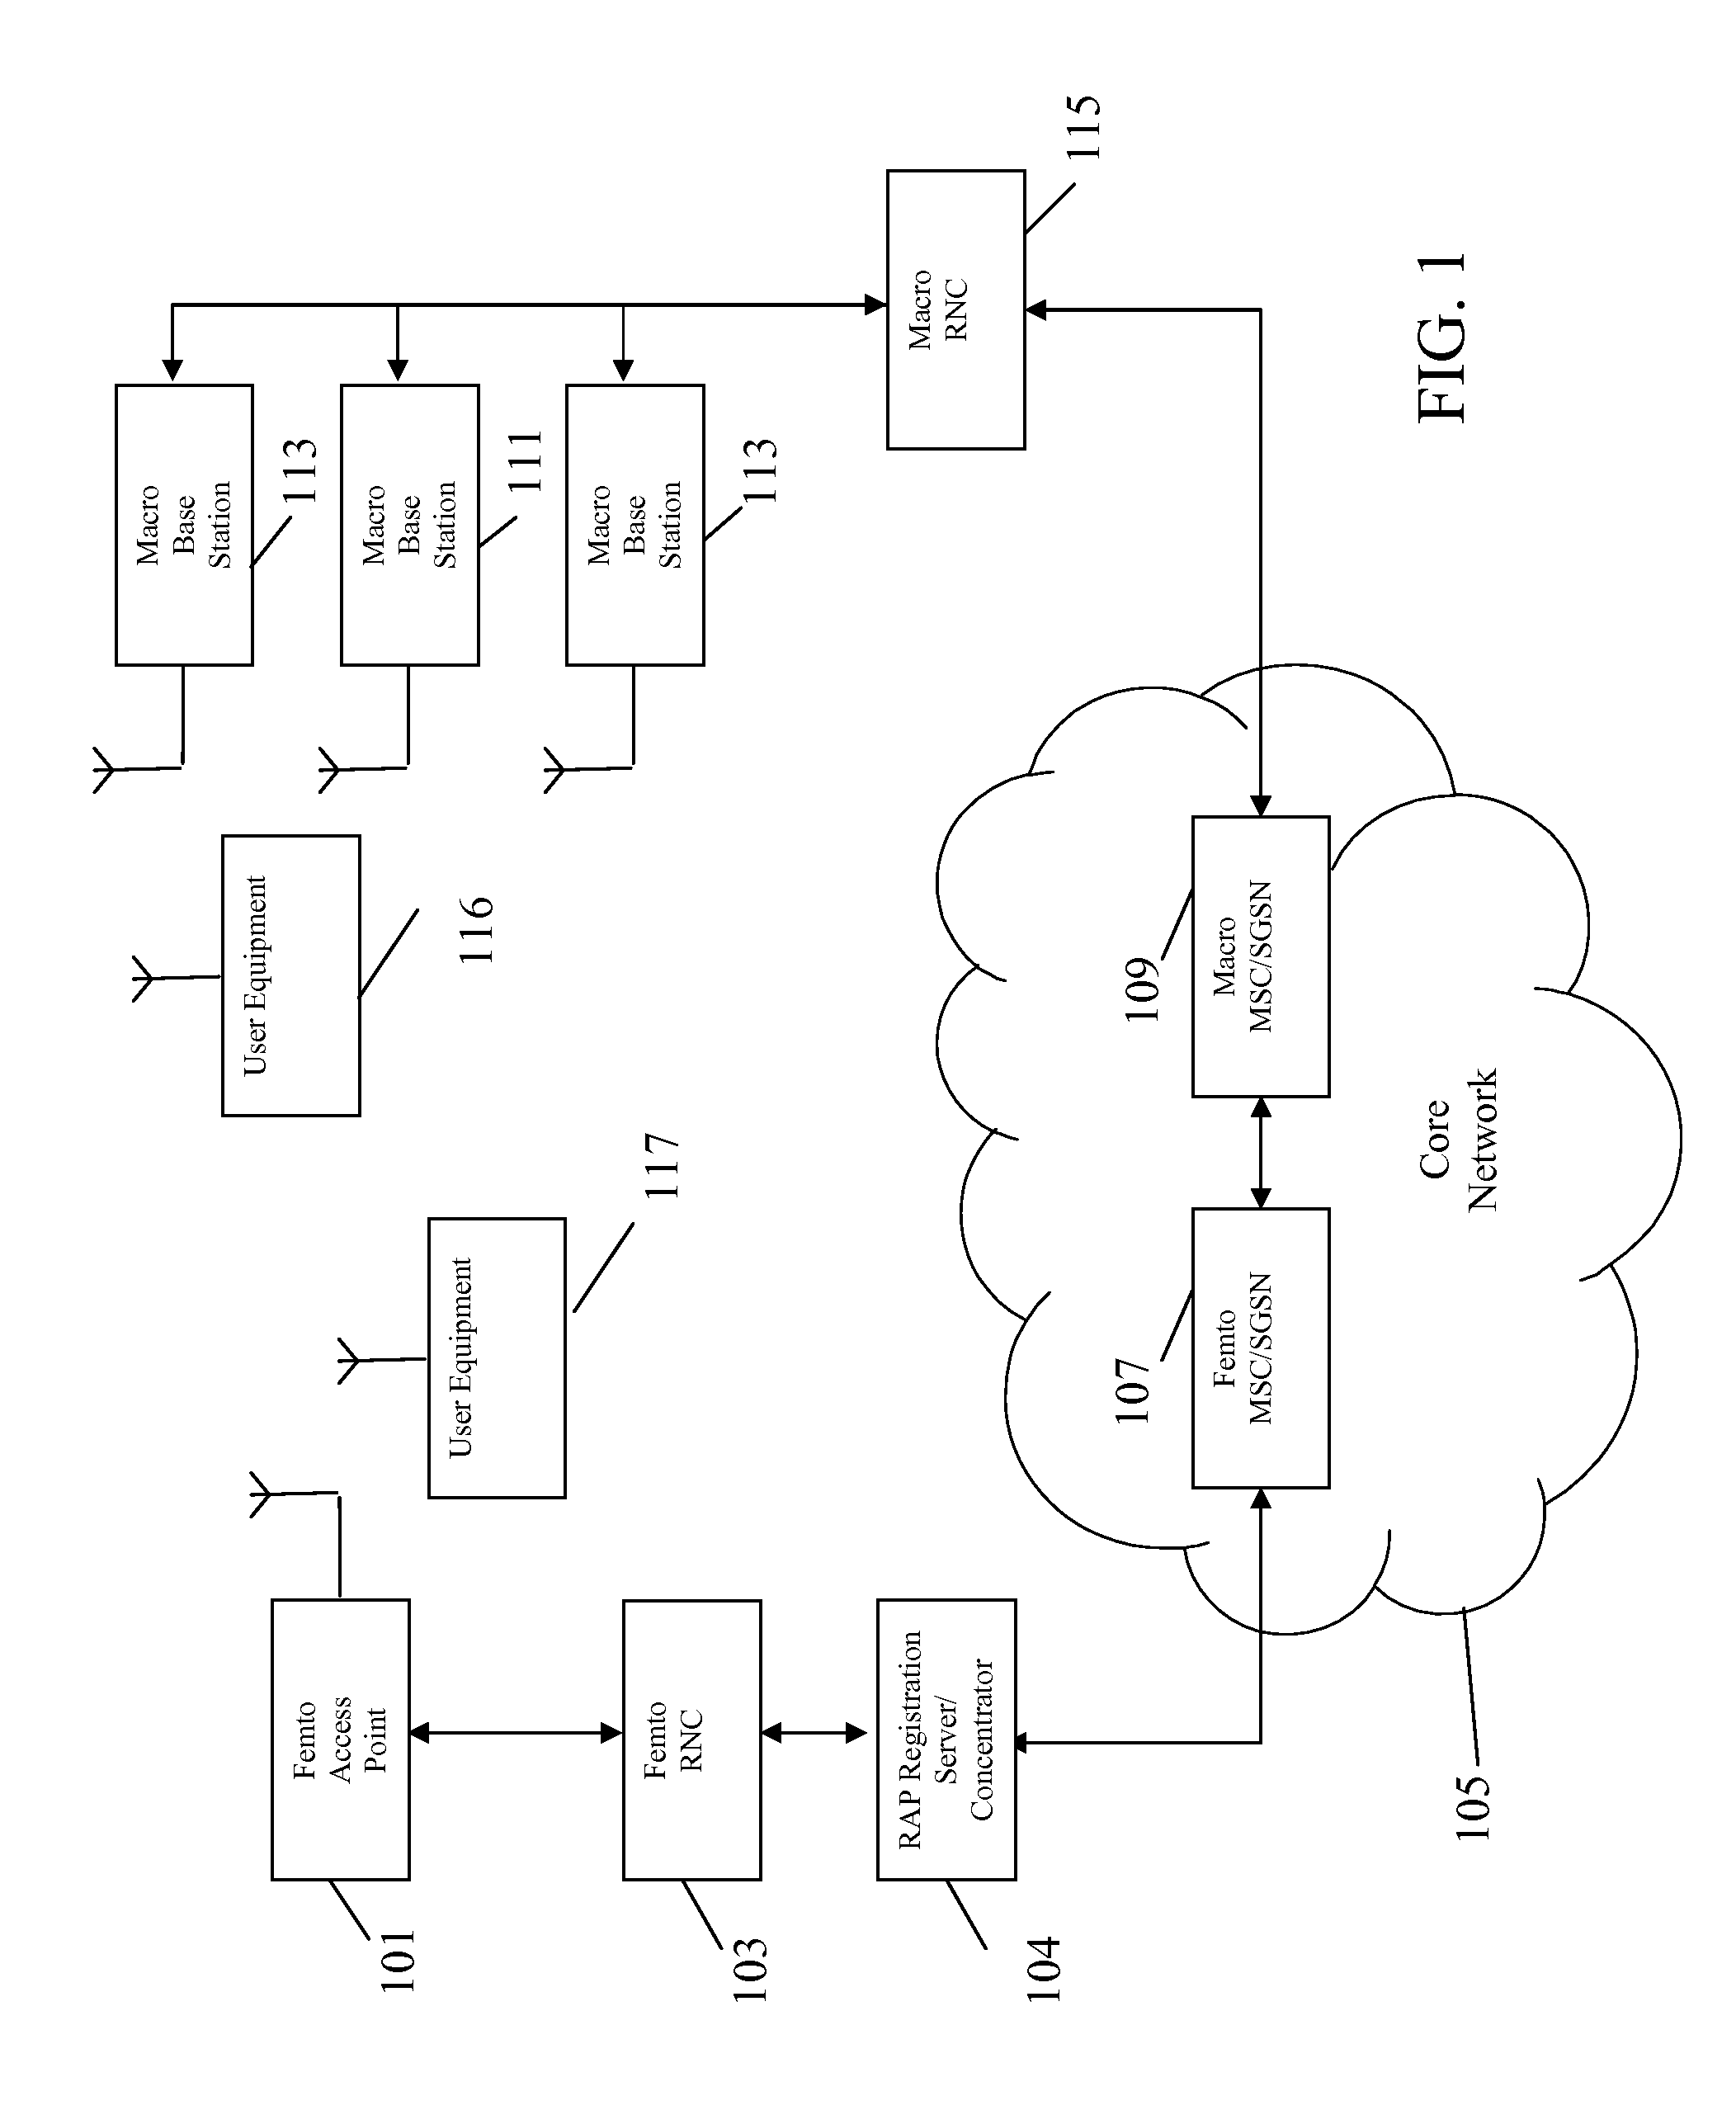 Optimizing power settings in a communication system to mitigate interference